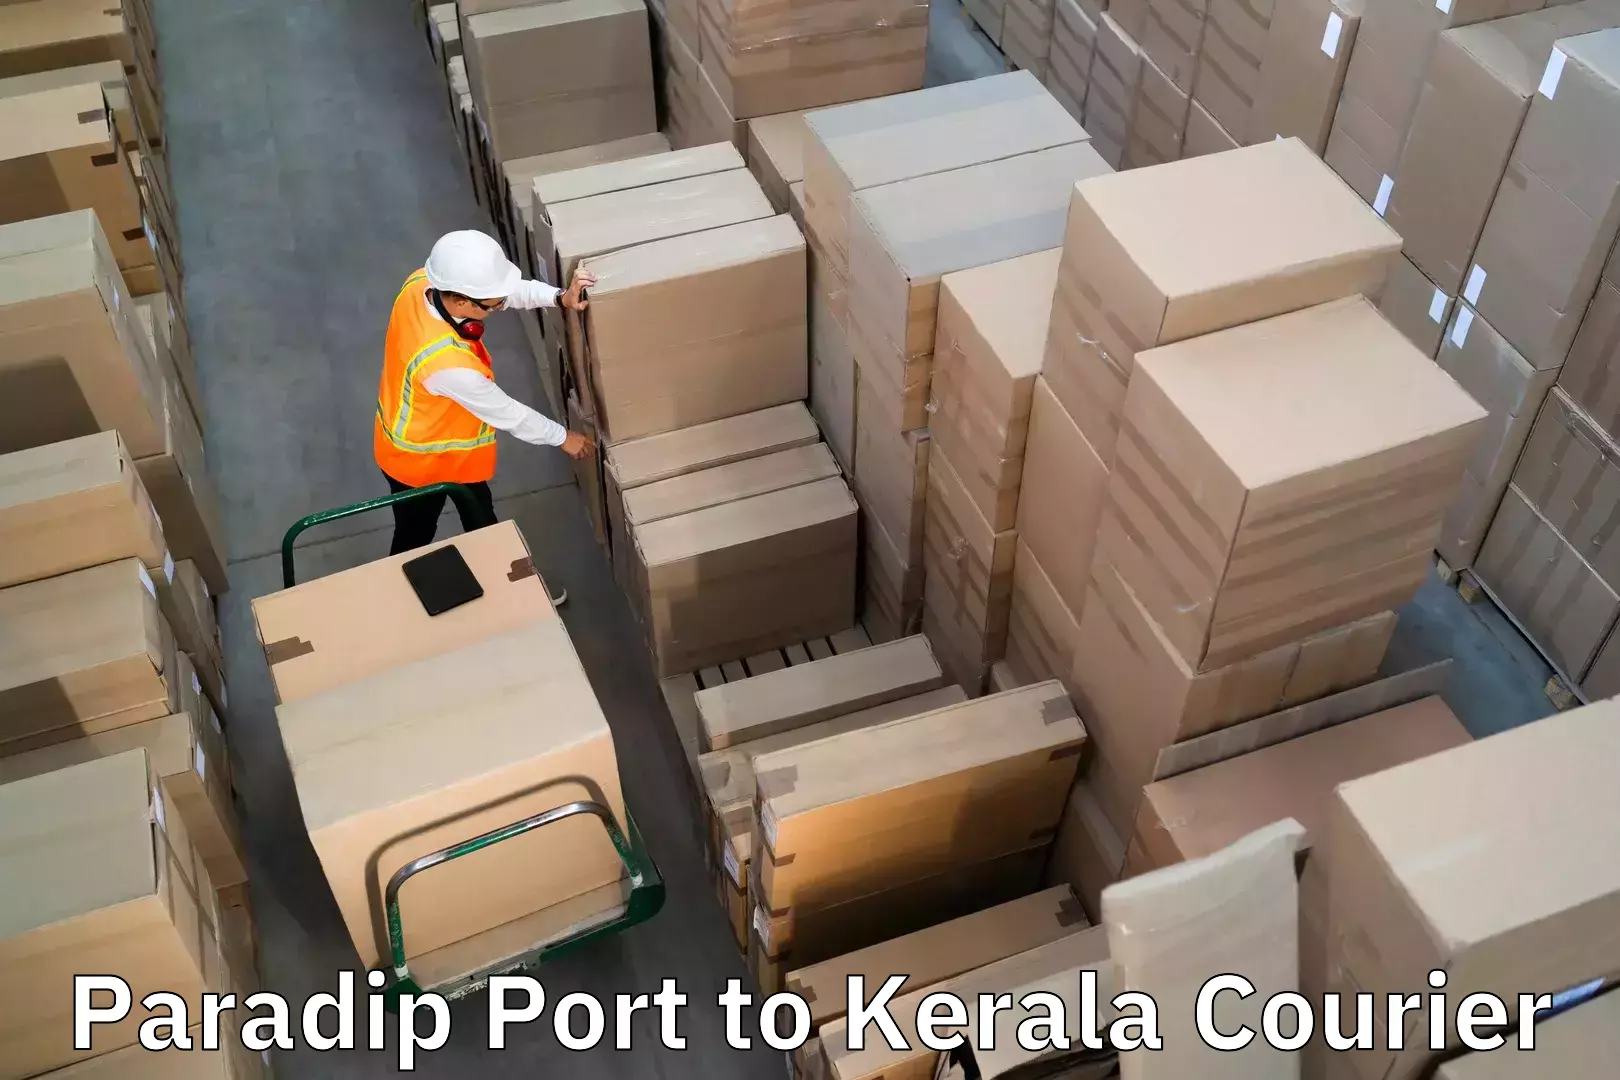 Excess baggage transport in Paradip Port to Vaikom